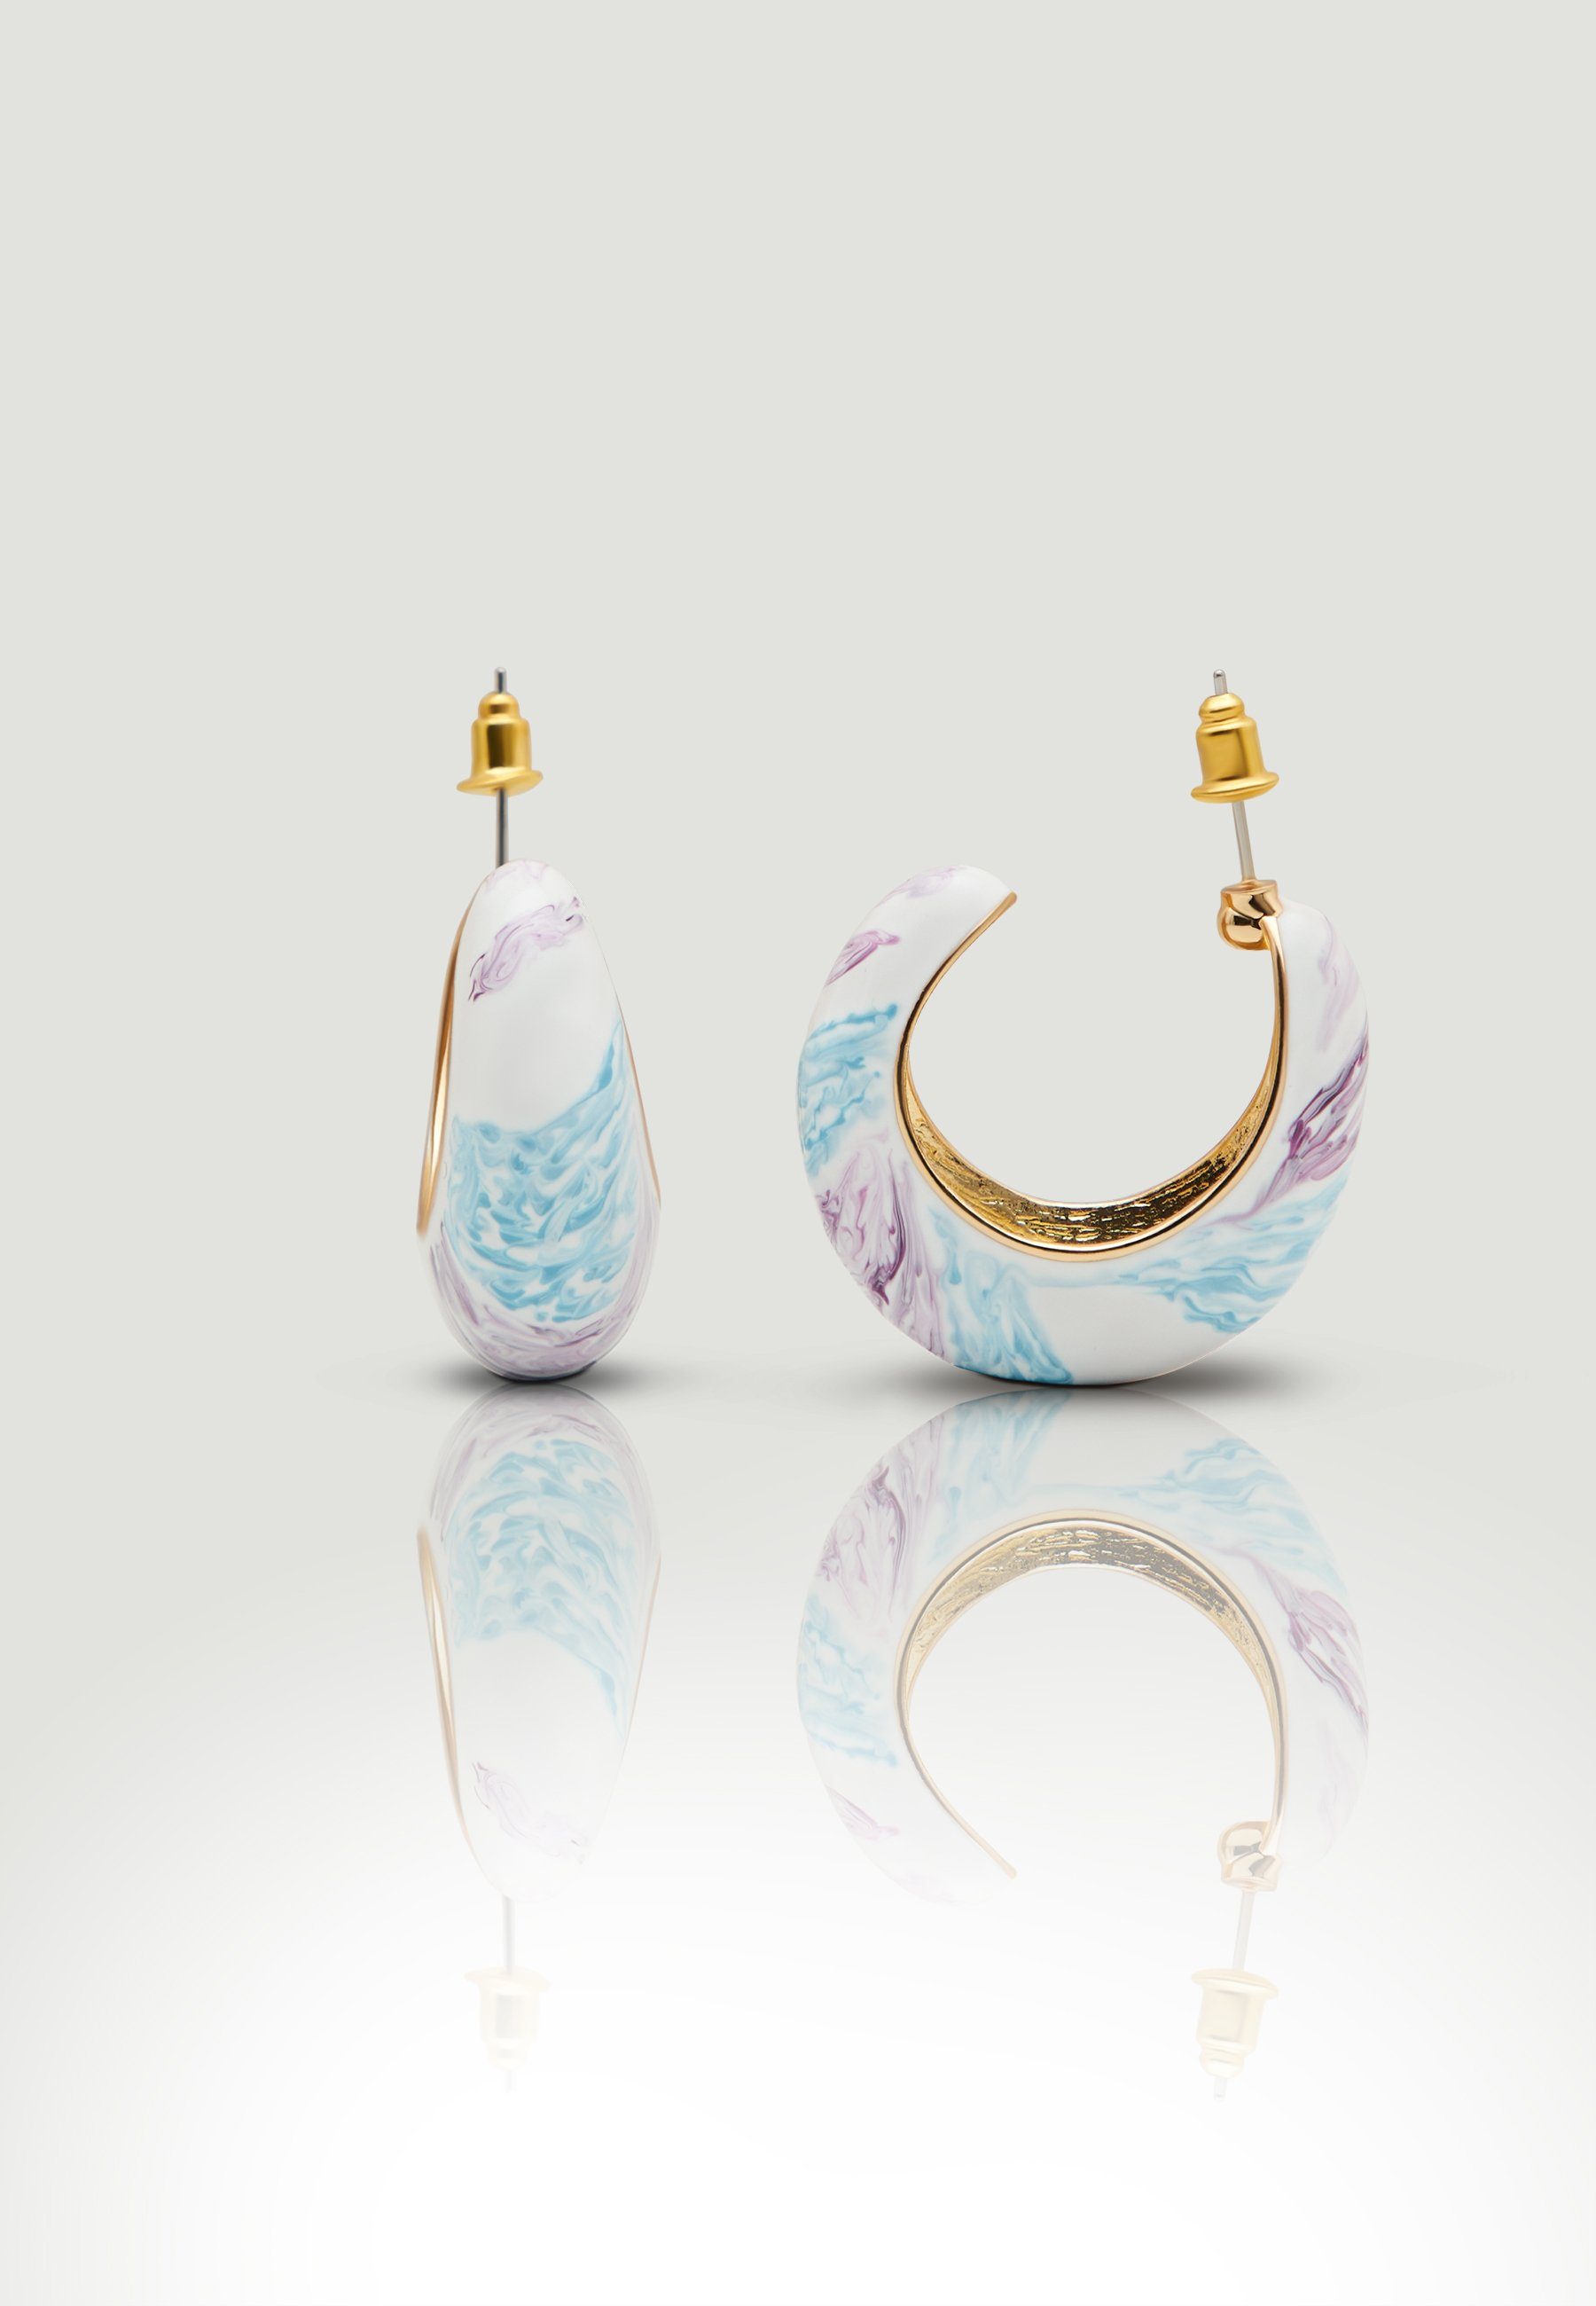 Tokyo Jane Ohrring-Set Mia, Gold Plated und Marble Muster White/Blue